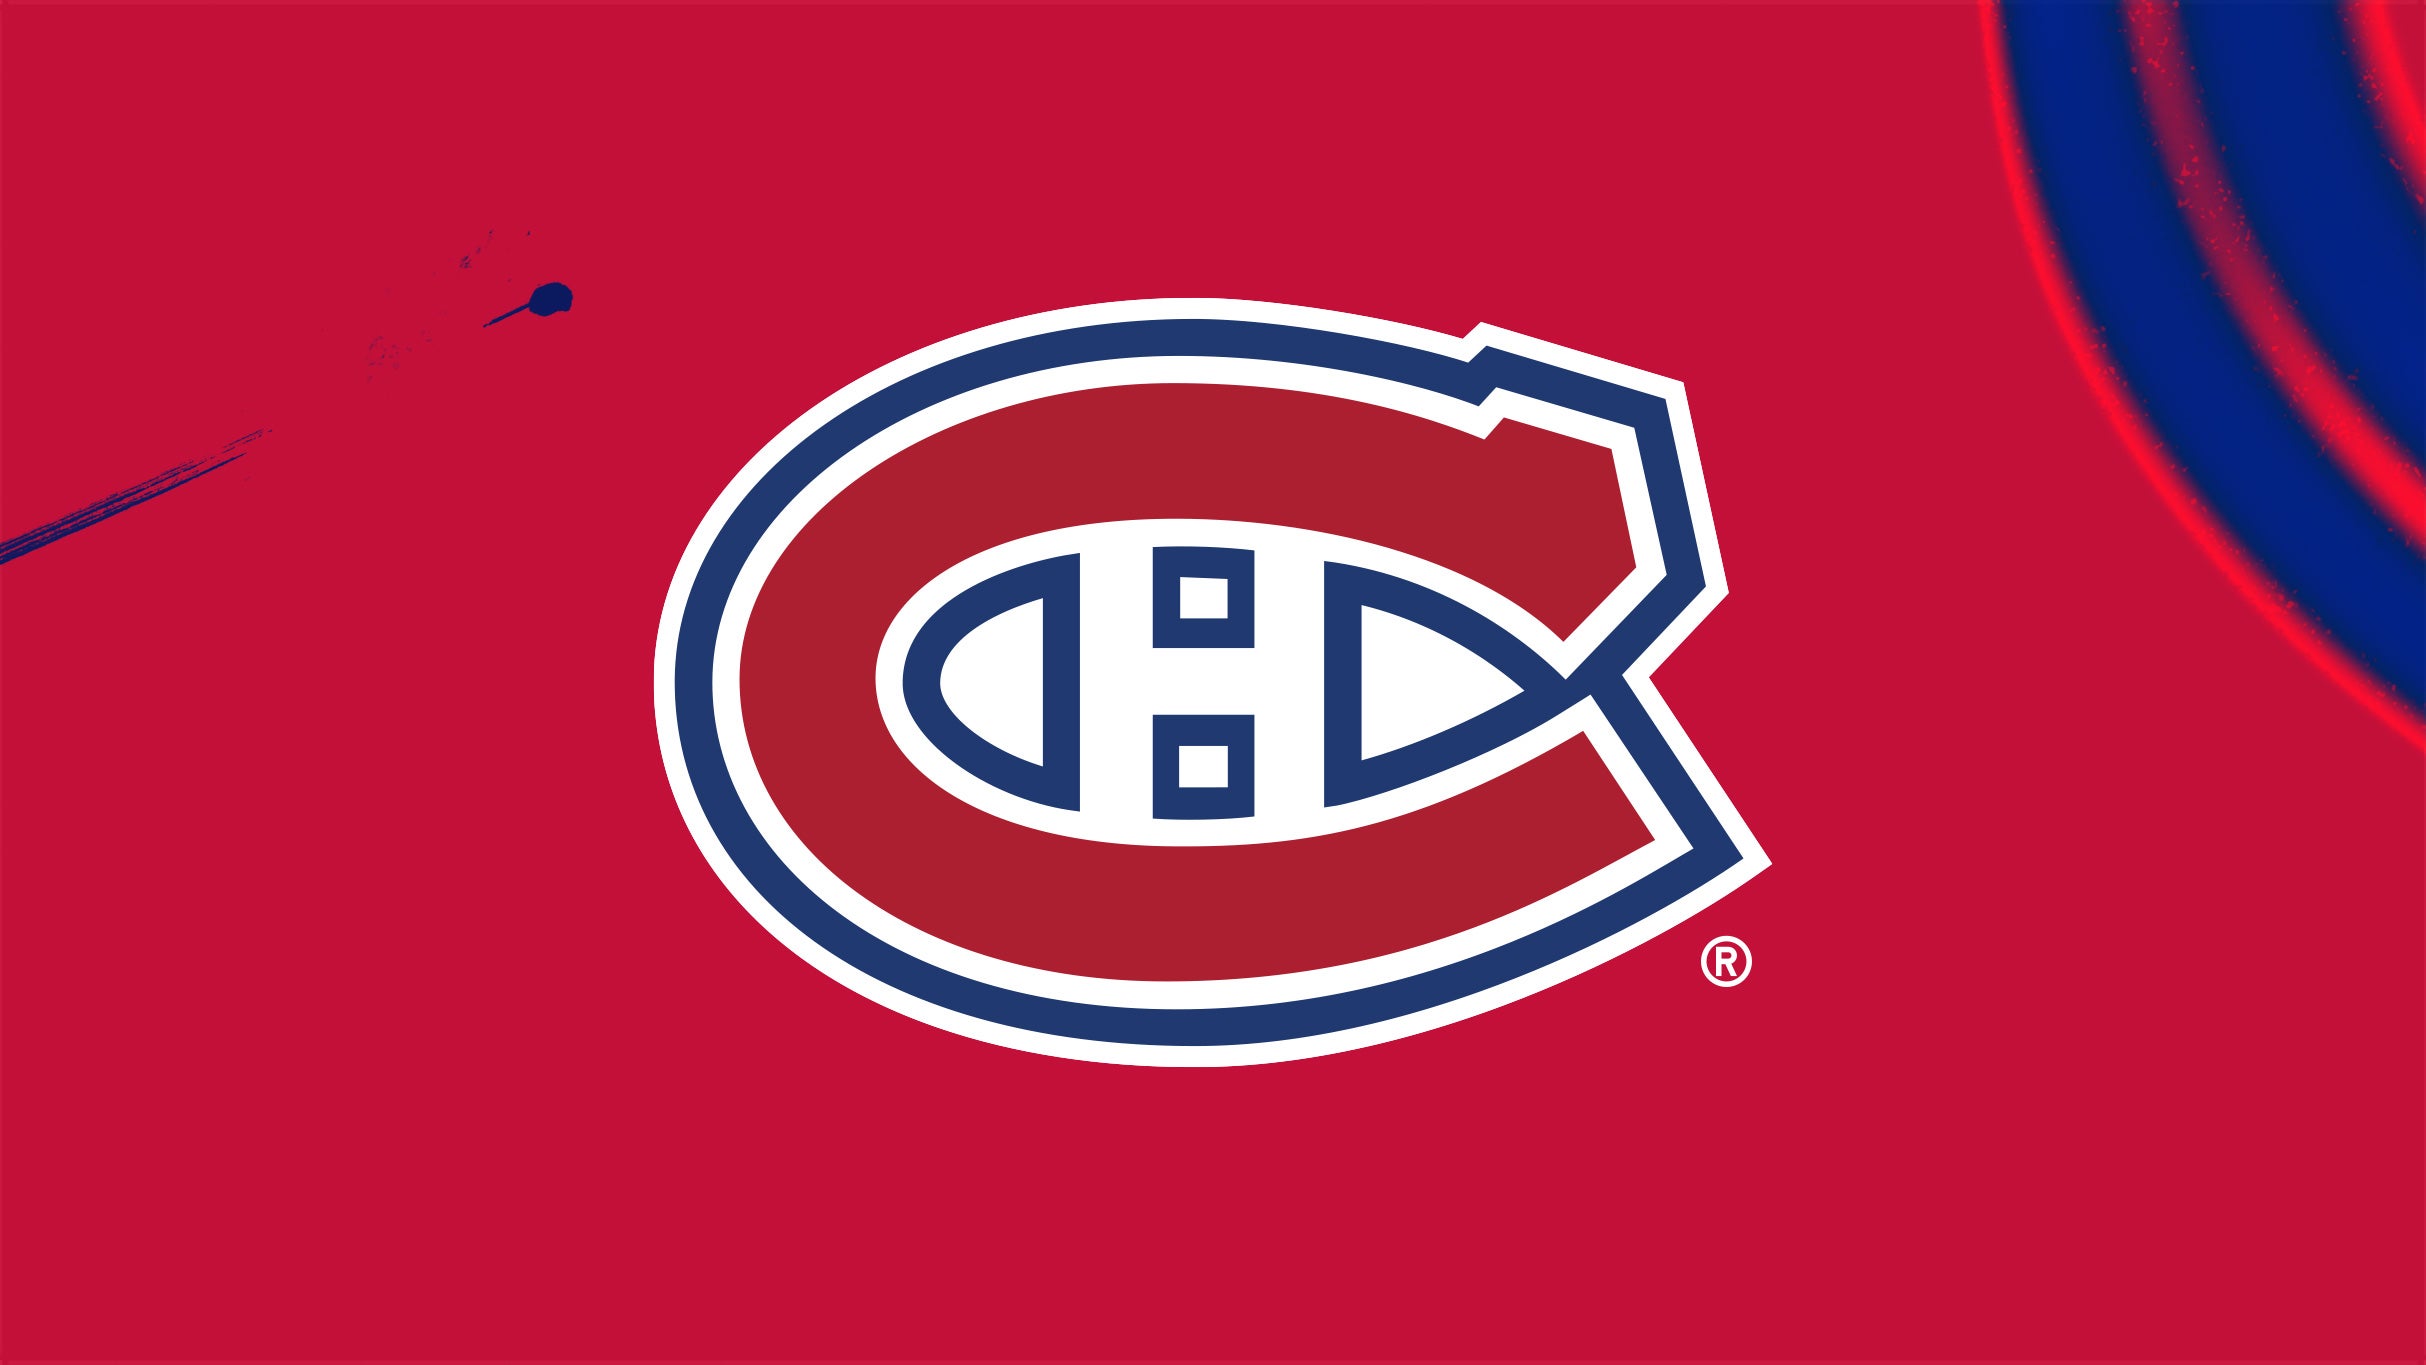 Montreal Canadiens vs. Buffalo Sabres in Montreal promo photo for Offre Bronze / Bronze  presale offer code